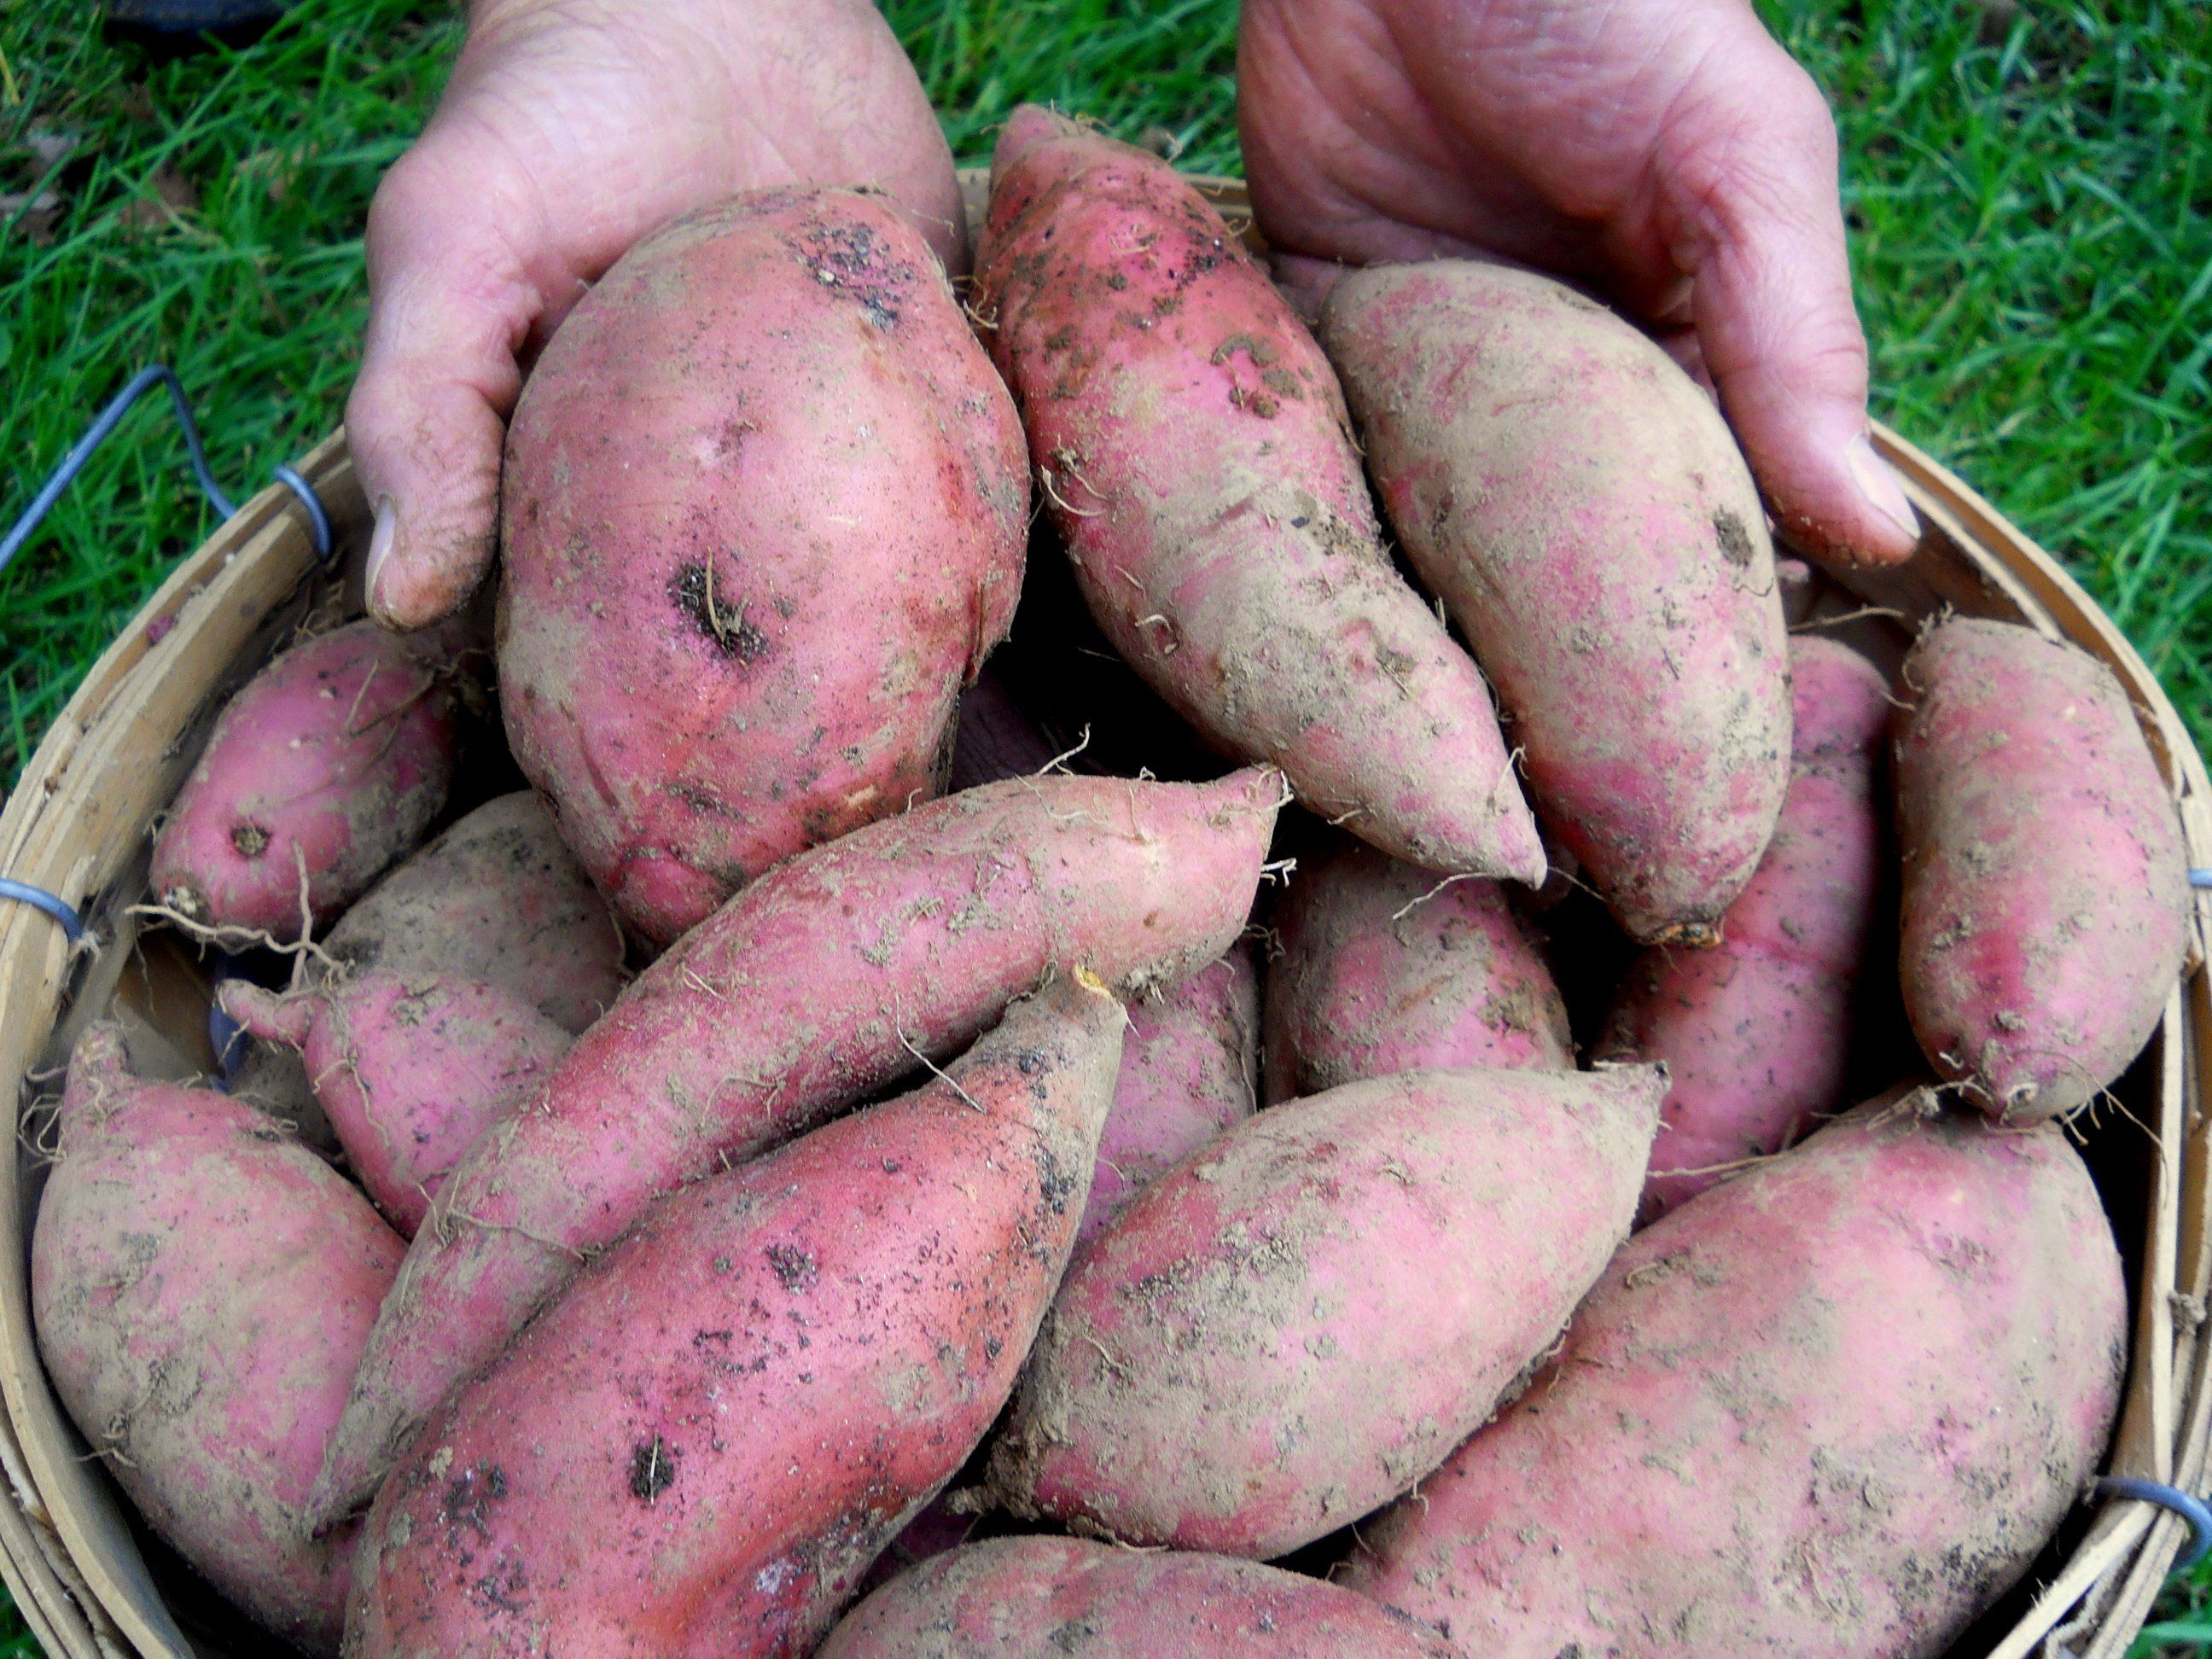 Previous Happening: Sweet Potatoes—Delicious, Nutritious